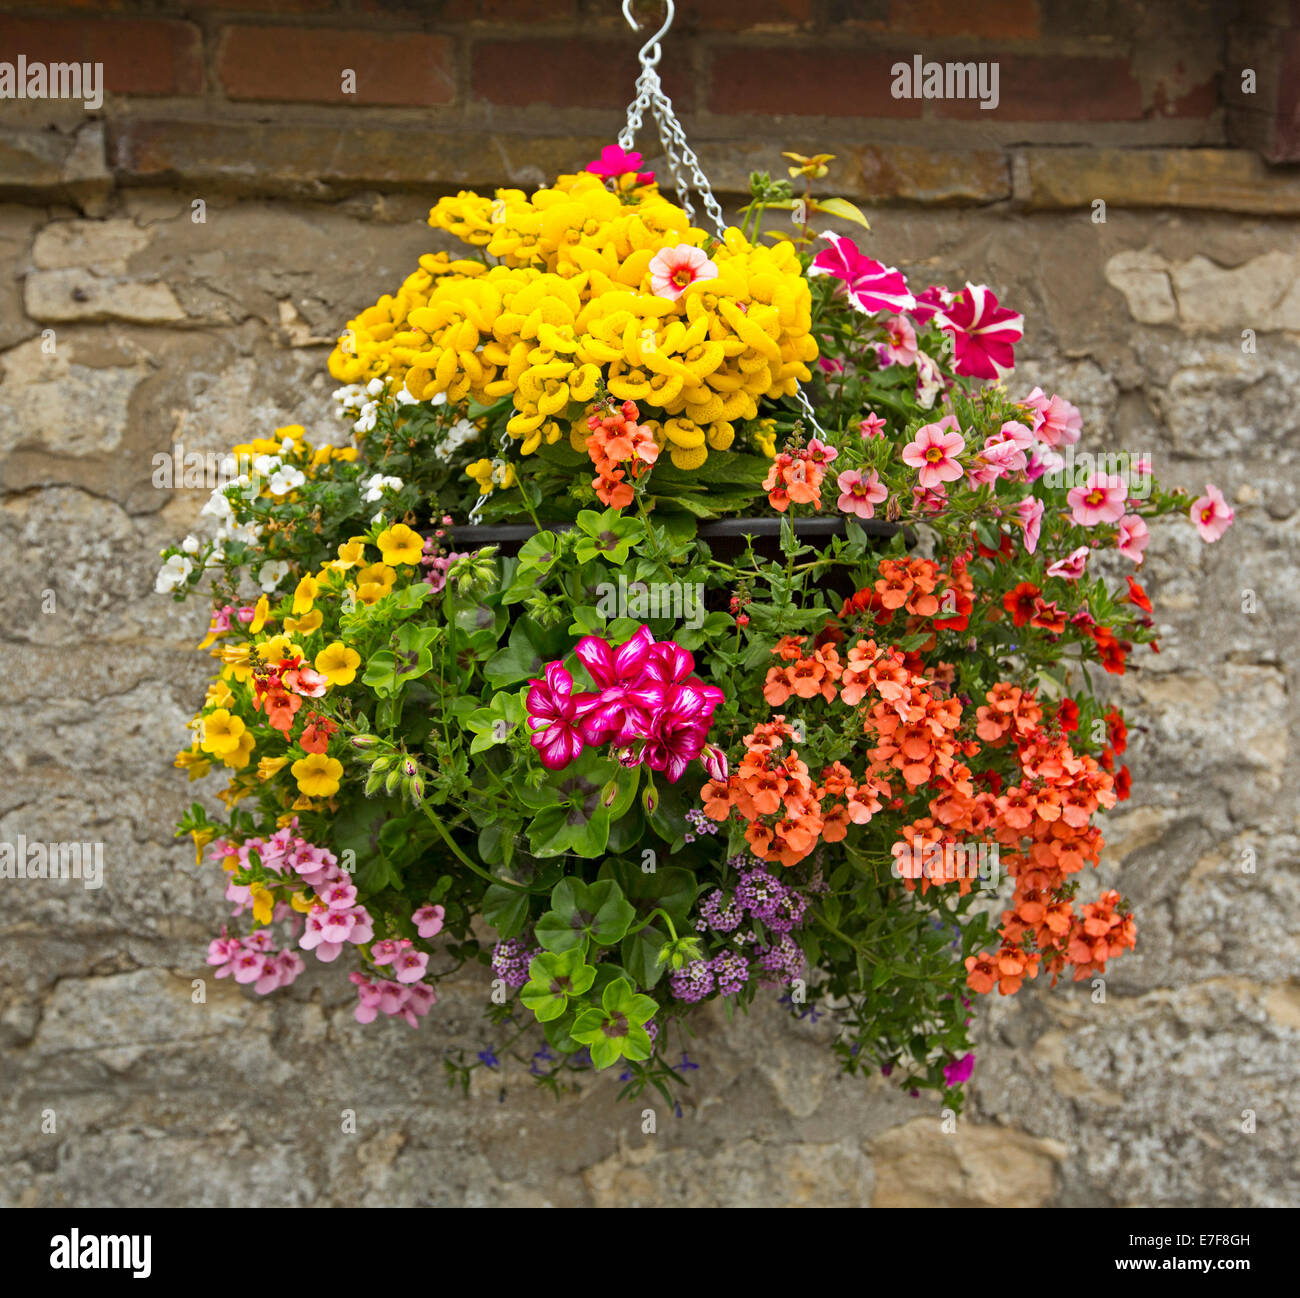 Hanging basket with mass of brightly coloured flowers, ivy geraniums, calibrachoas, petunias, green foliage, against stone wall Stock Photo